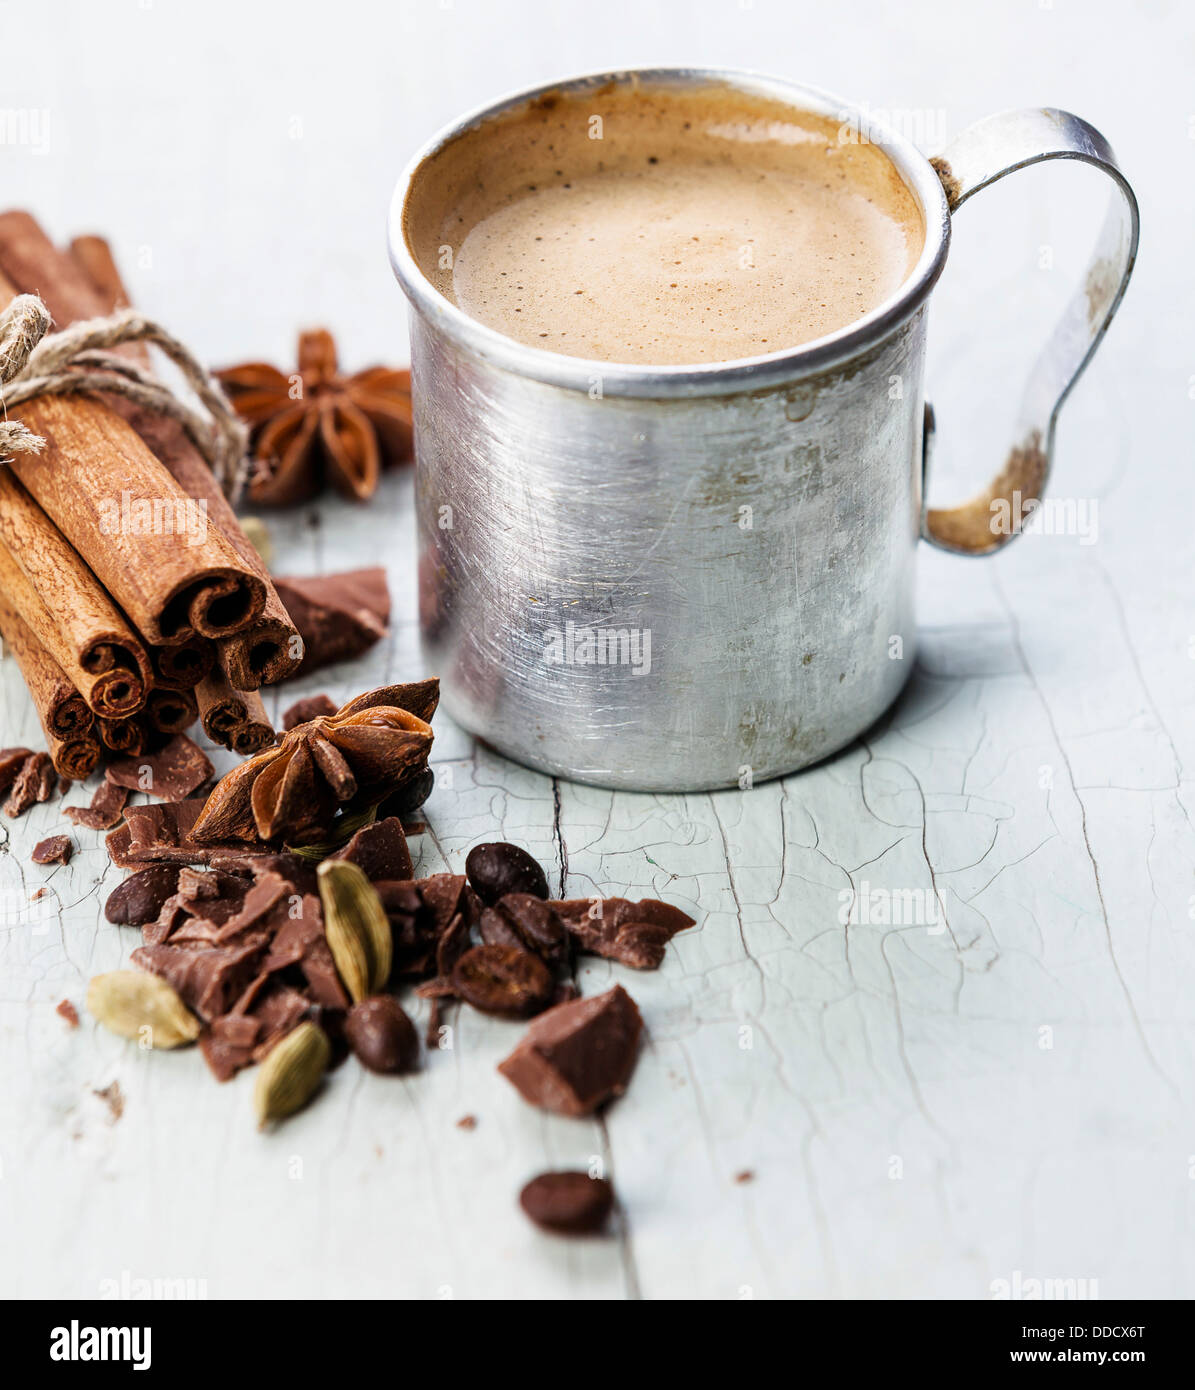 Coffee in aluminum mug with spices Stock Photo